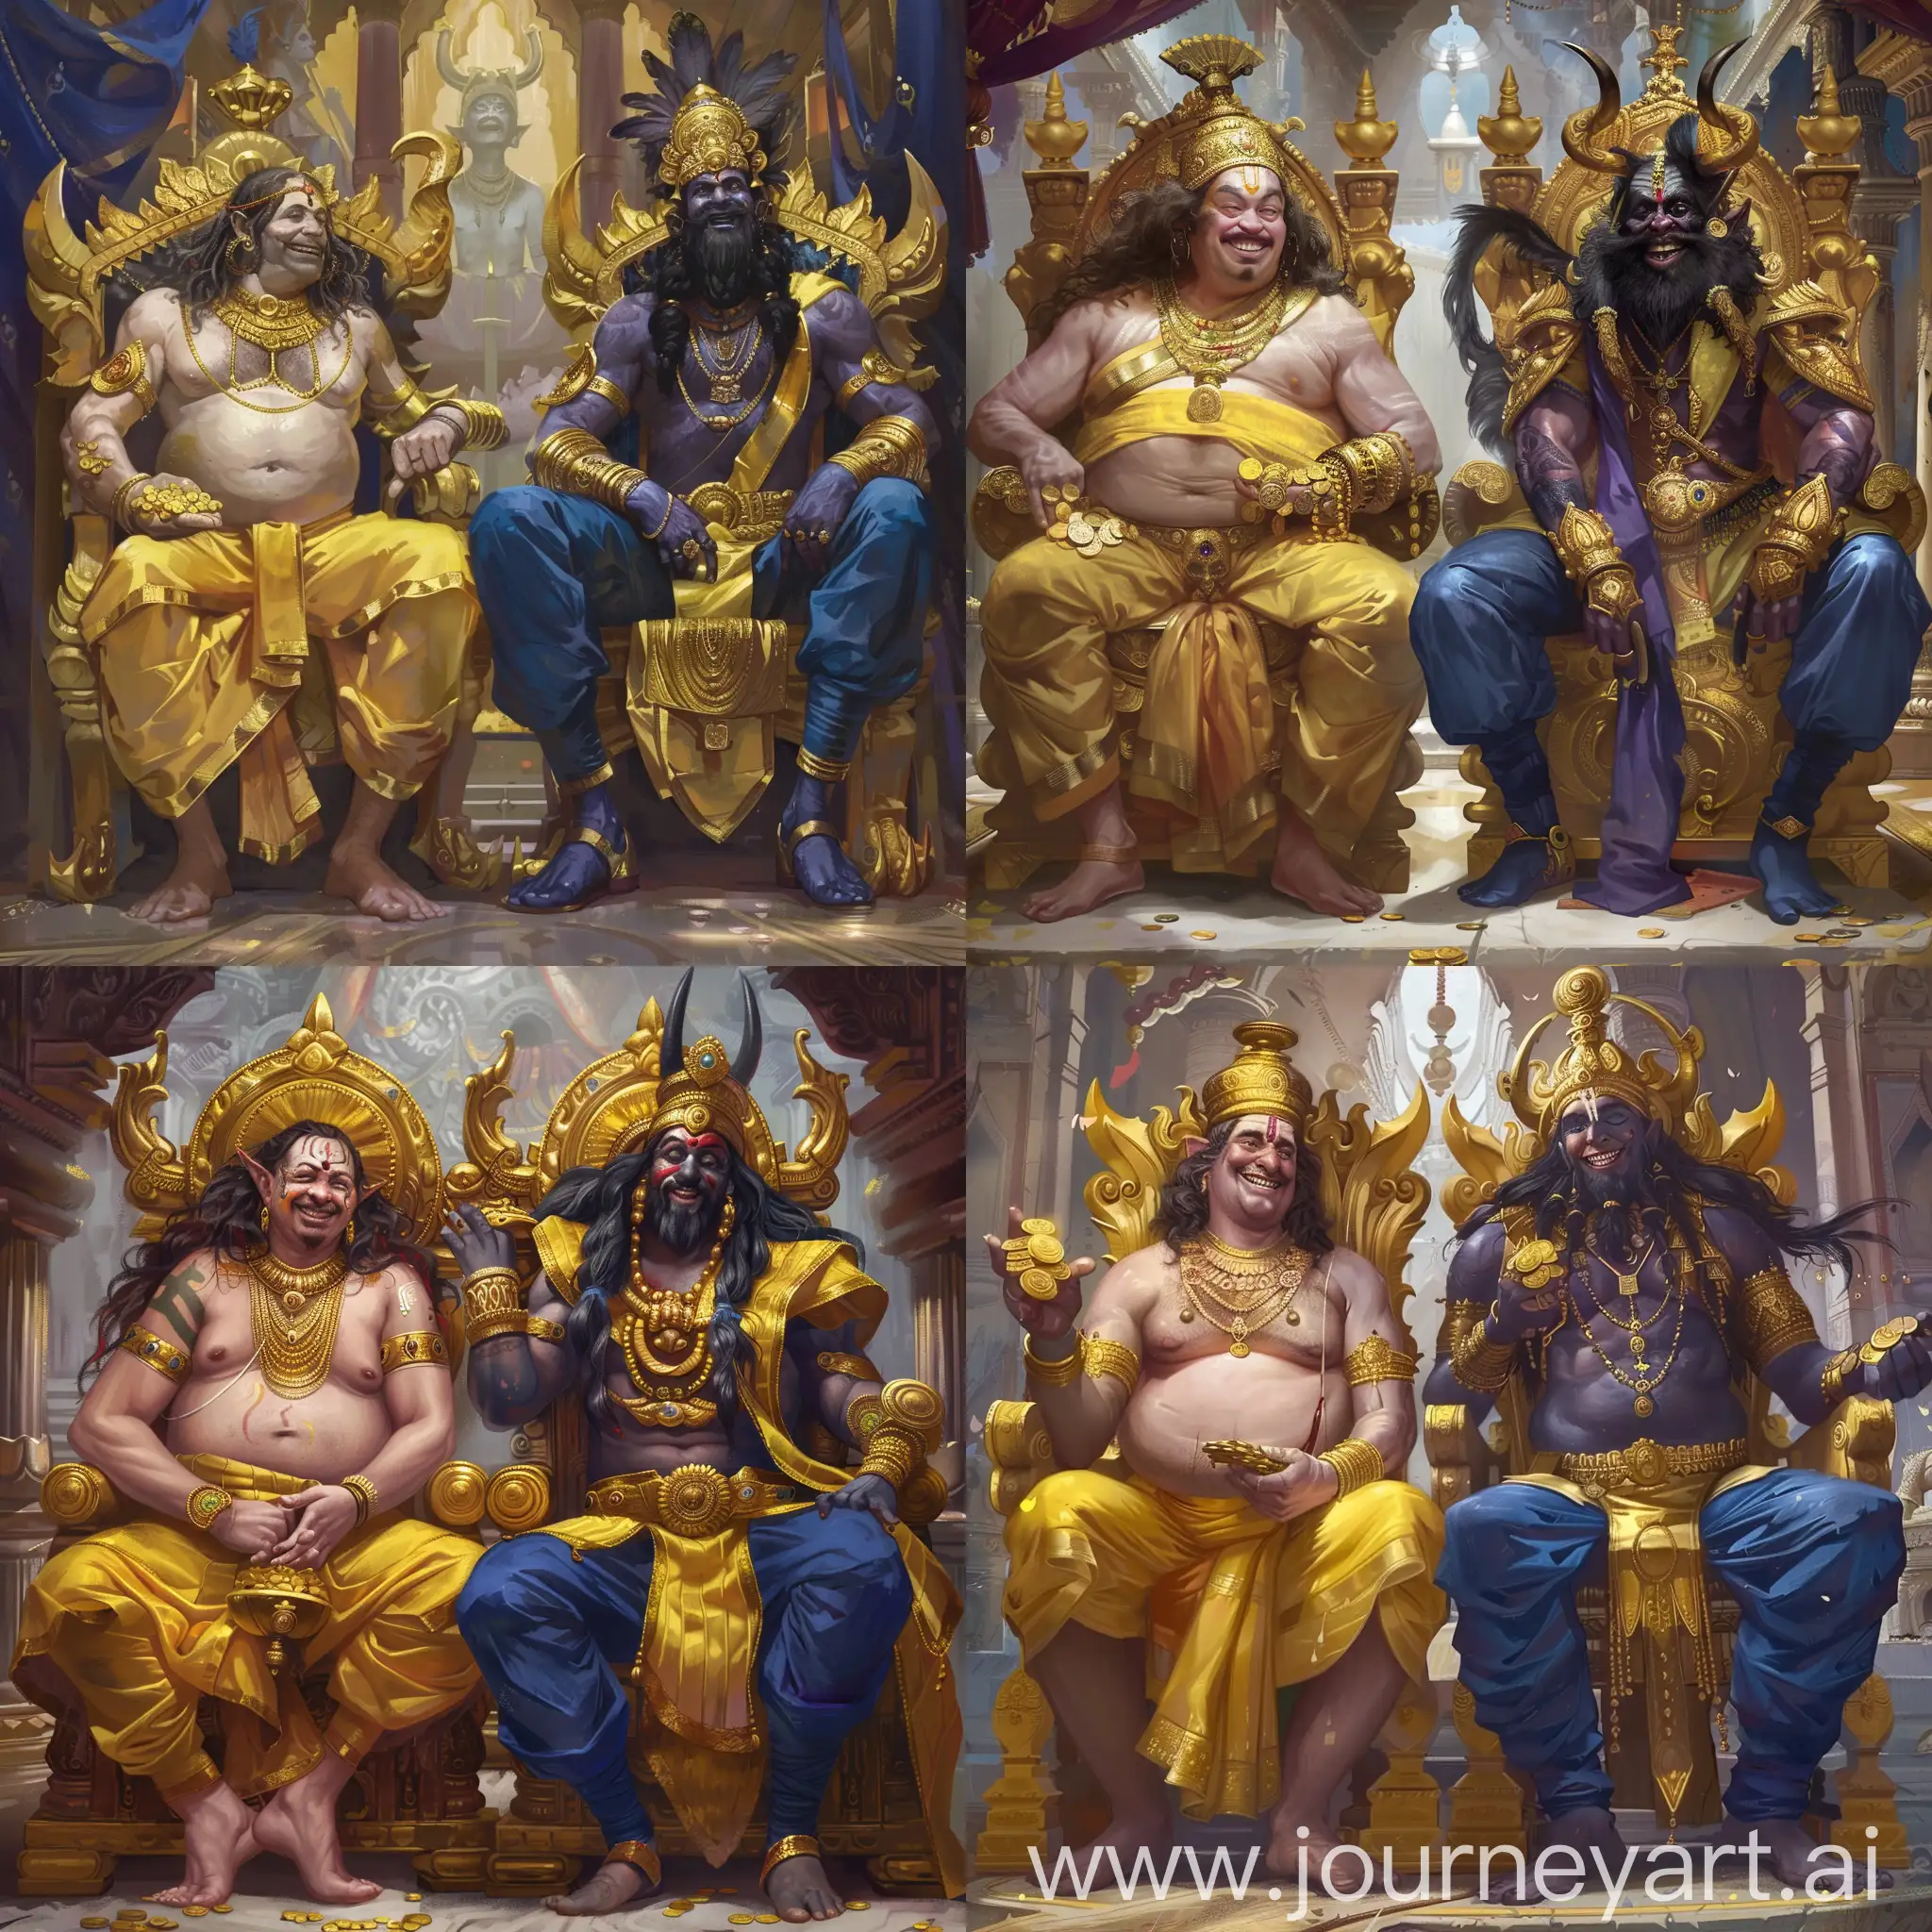 Ancient-Indian-Lord-and-Hindu-Demon-King-on-Golden-Thrones-in-a-Splendid-Demonic-Temple